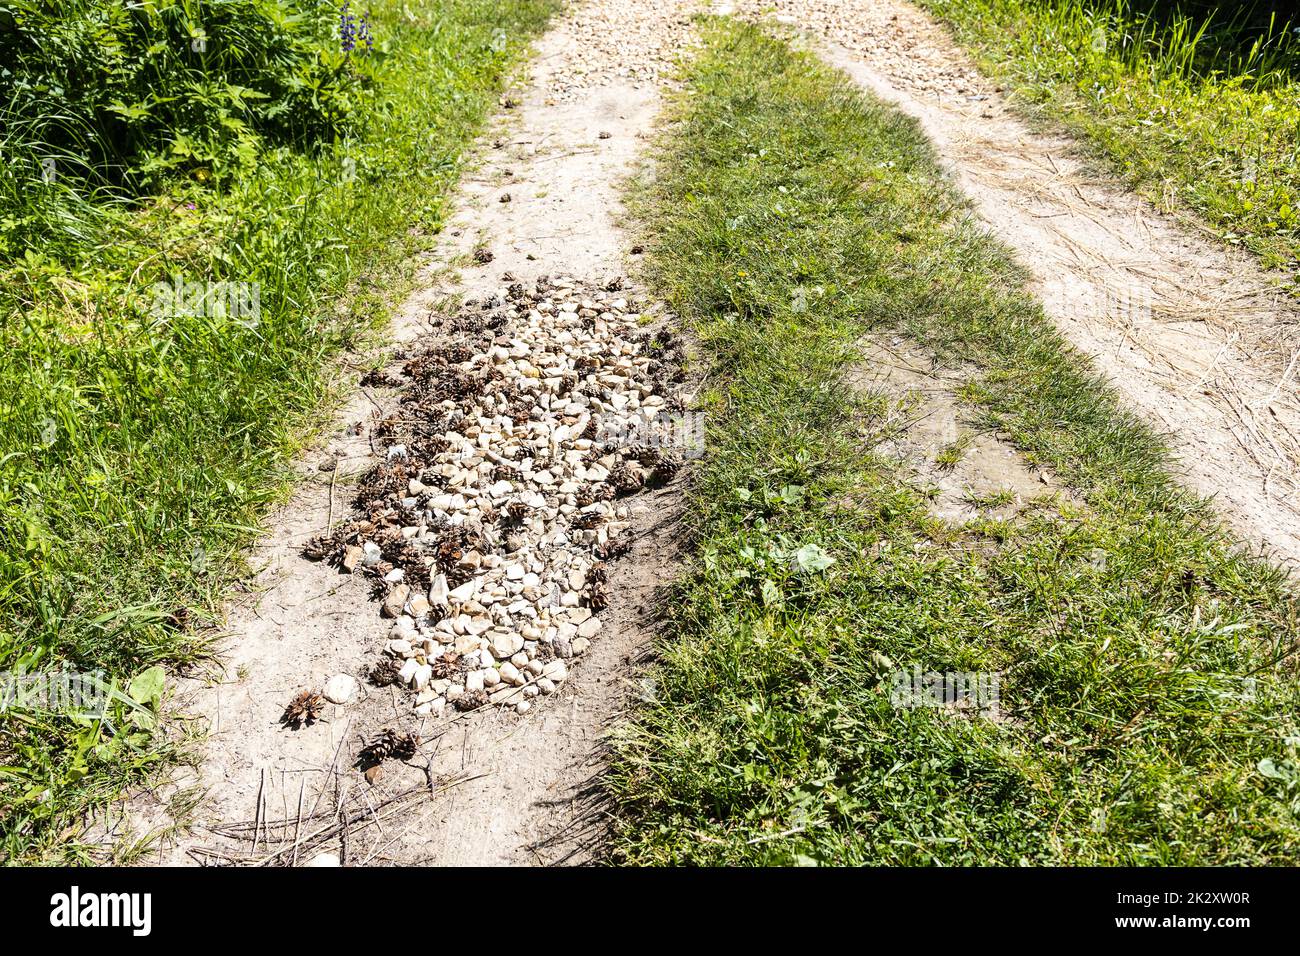 pit on dirt road filled with rubble and pine cones Stock Photo